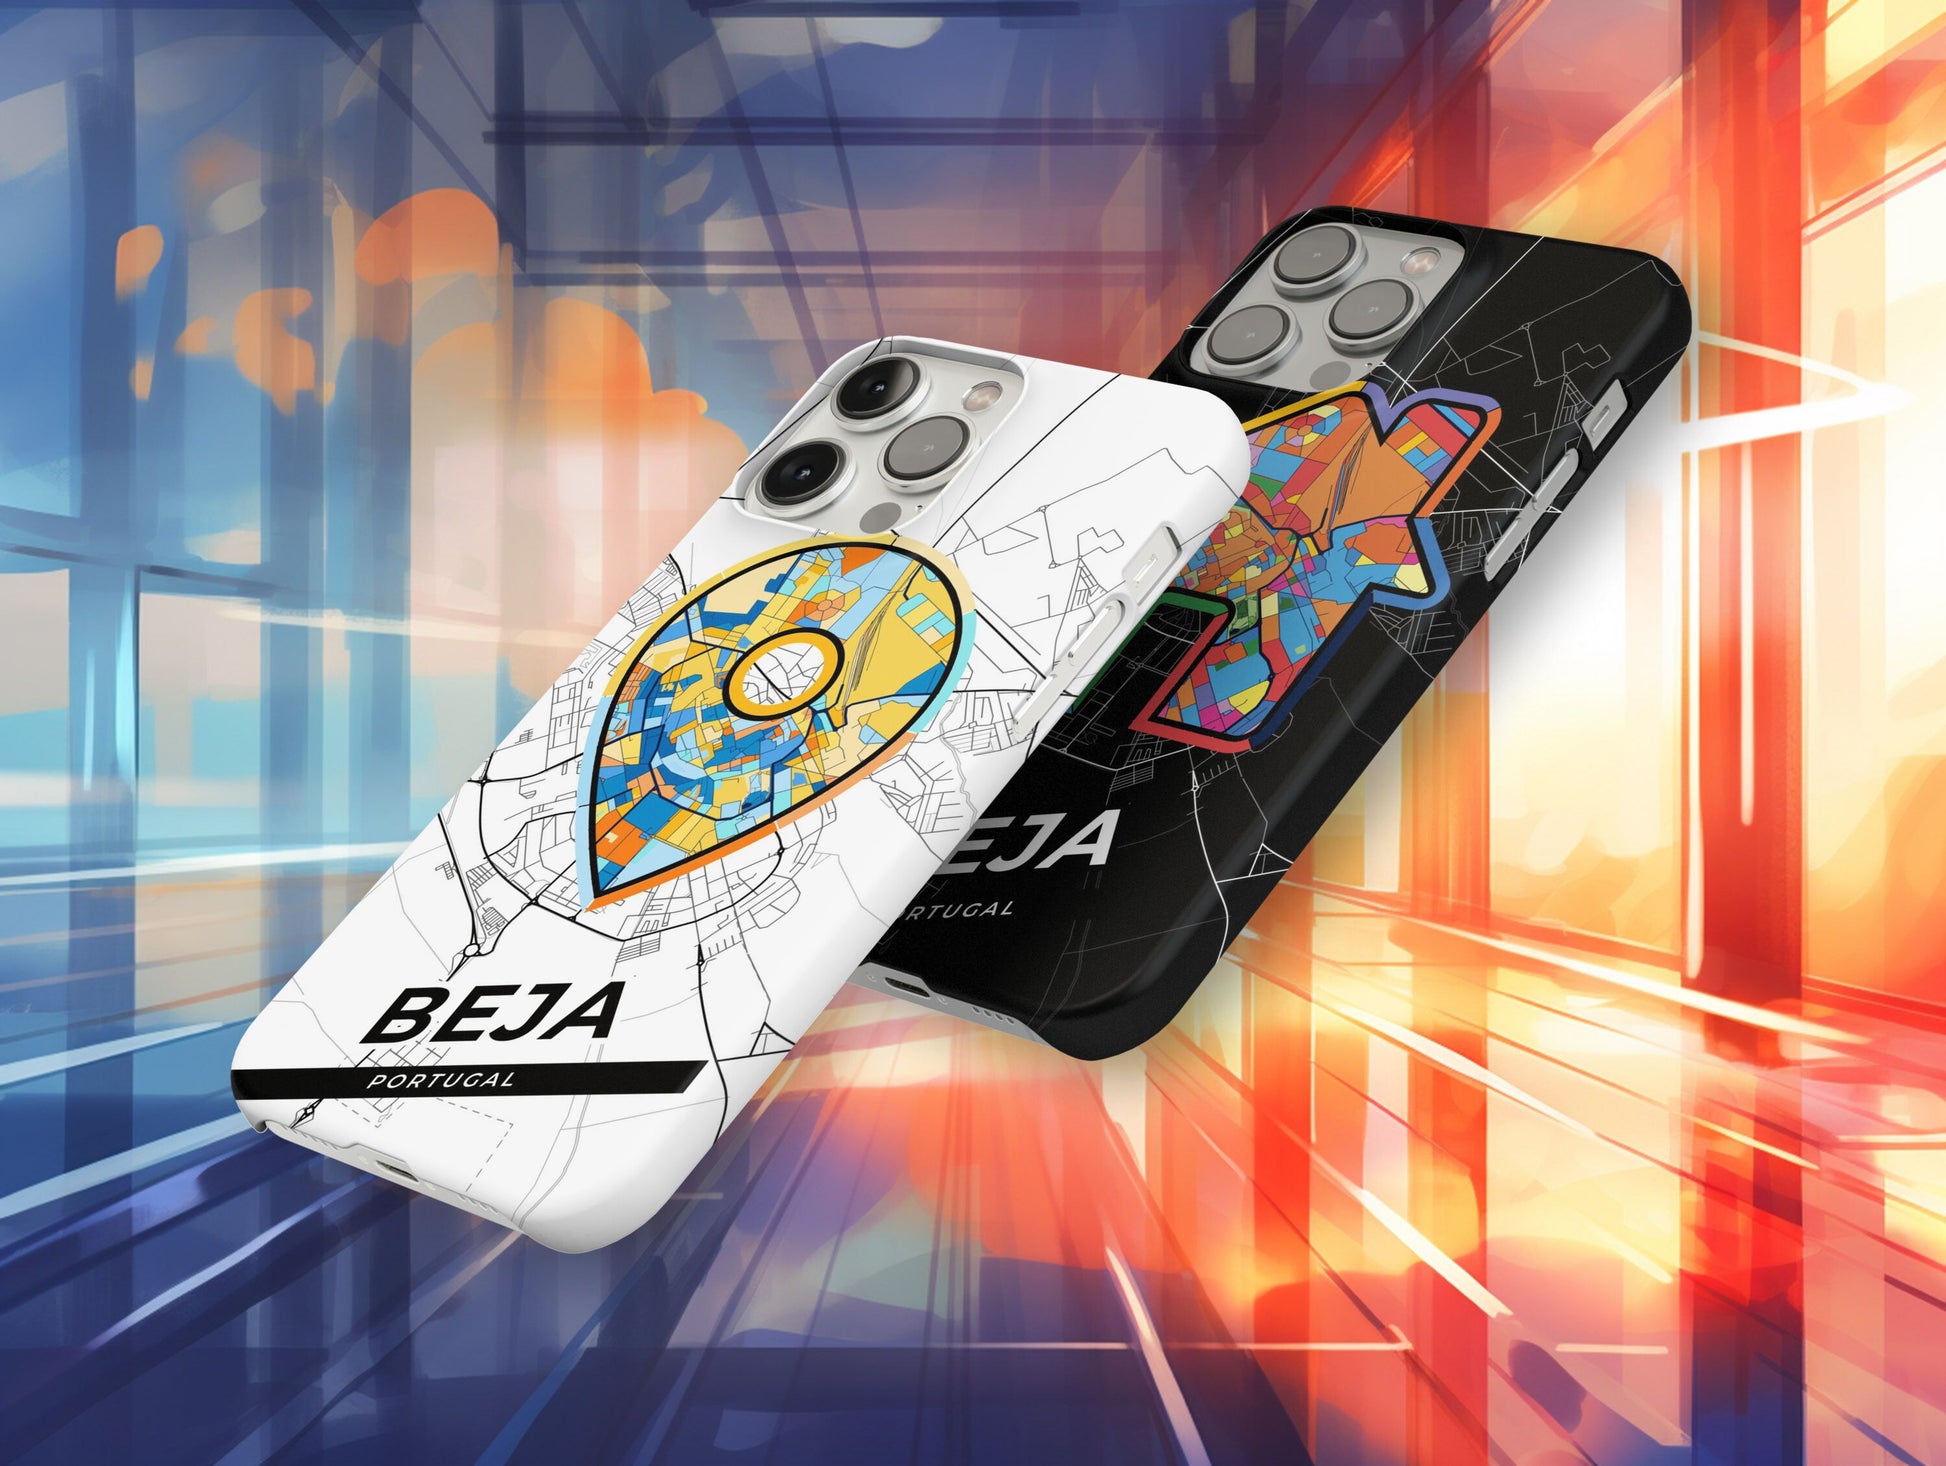 Beja Portugal slim phone case with colorful icon. Birthday, wedding or housewarming gift. Couple match cases.